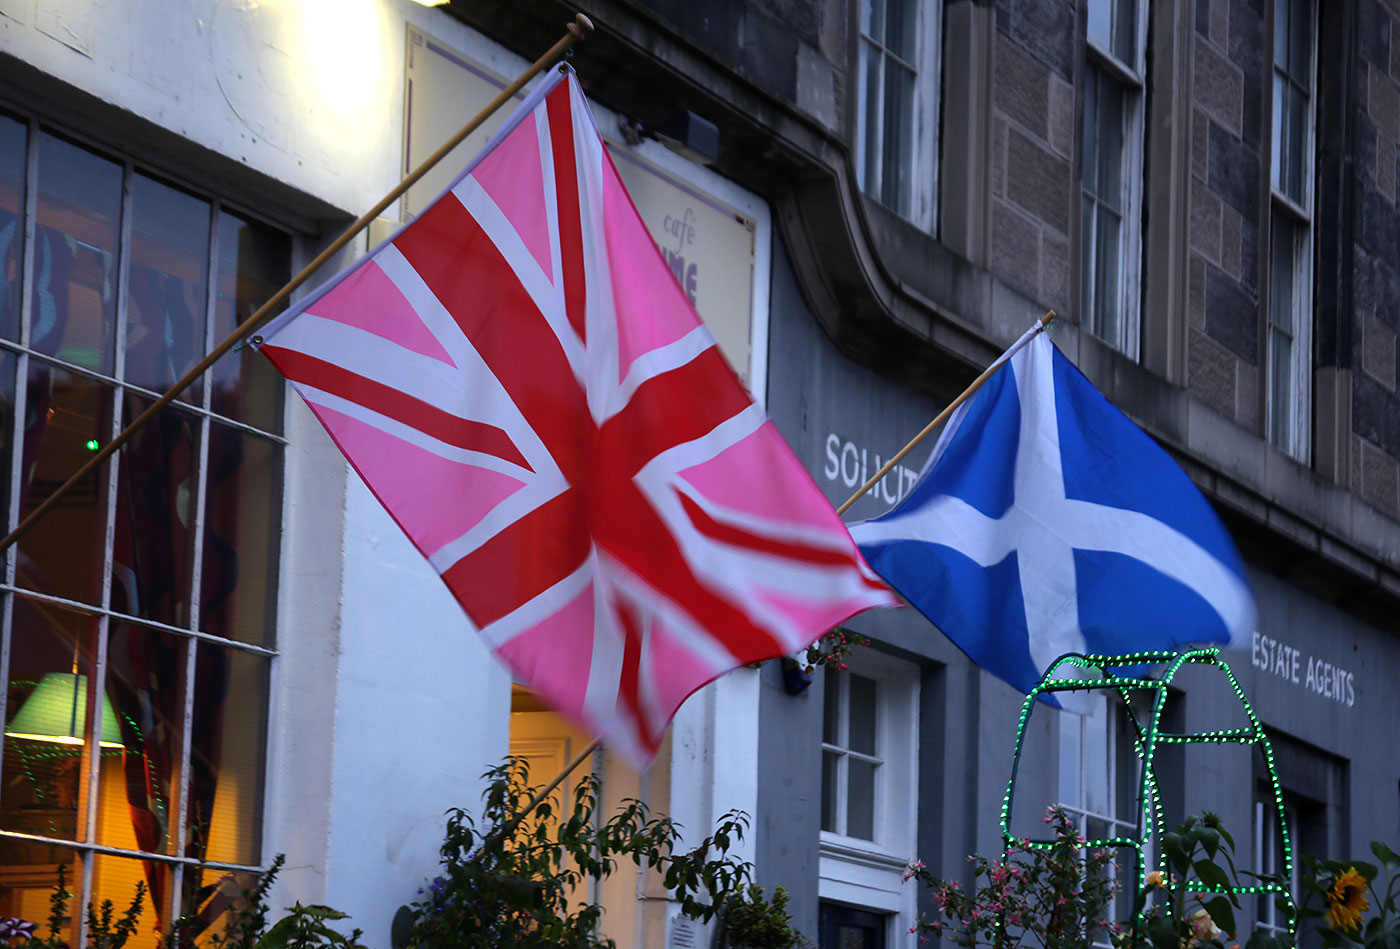 Photos taken in Edinburgh on voting day in the  Scottish Indepemdence Referendum on 18 September 2014  -  Flags at Broughton